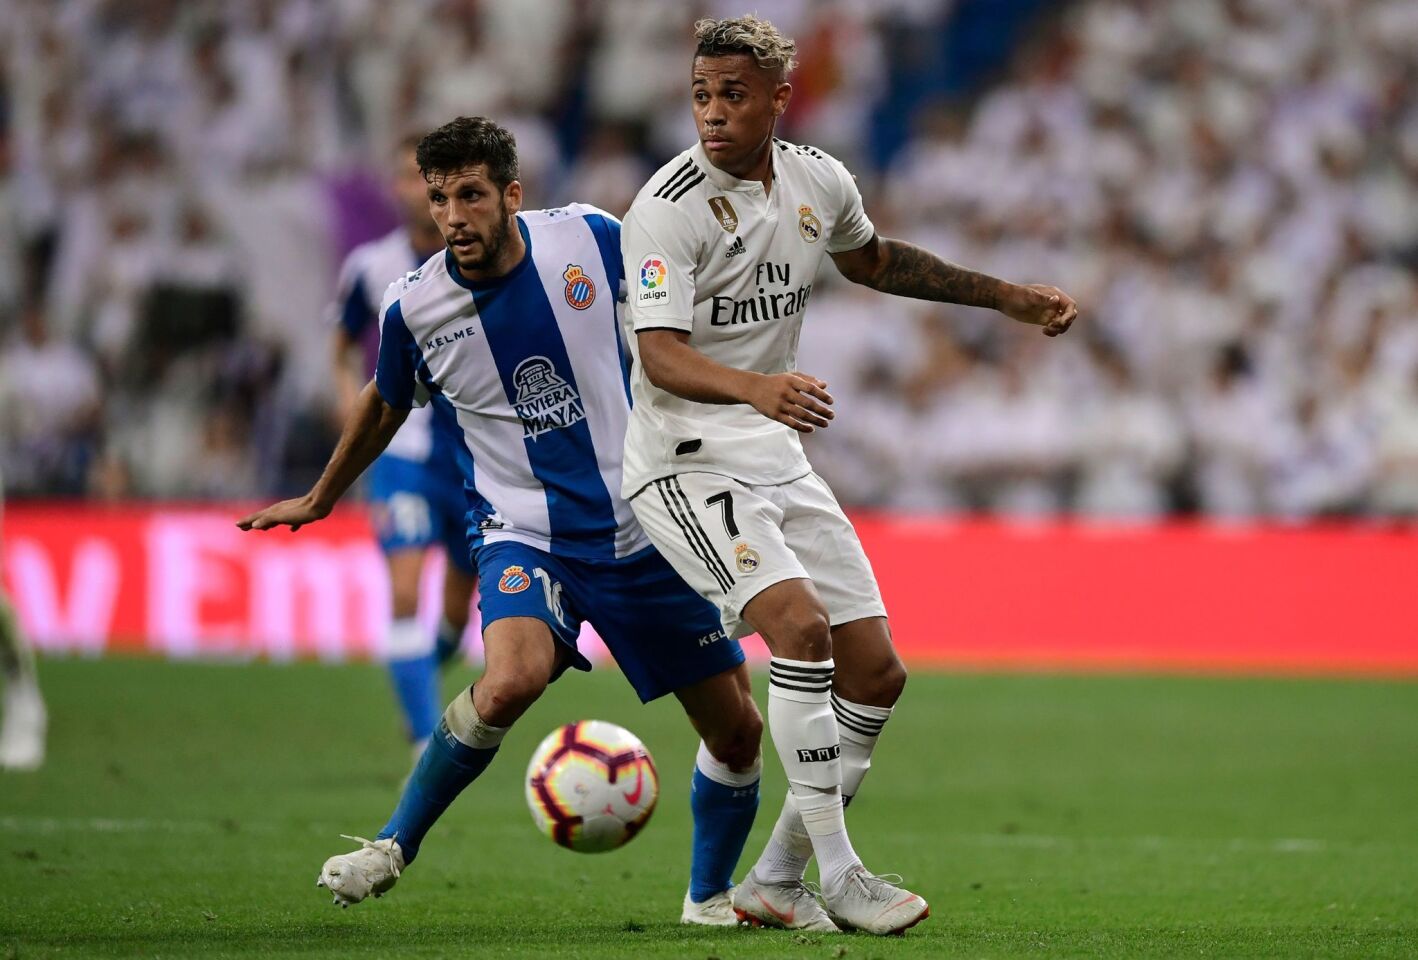 Espanyol's Spanish defender Javier Lopez (L) vies with Real Madrid's Spanish-Dominican forward Mariano during the Spanish league football match between Real Madrid CF and RCD Espanyol at the Santiago Bernabeu stadium in Madrid on September 22, 2018. (Photo by JAVIER SORIANO / AFP)JAVIER SORIANO/AFP/Getty Images ** OUTS - ELSENT, FPG, CM - OUTS * NM, PH, VA if sourced by CT, LA or MoD **